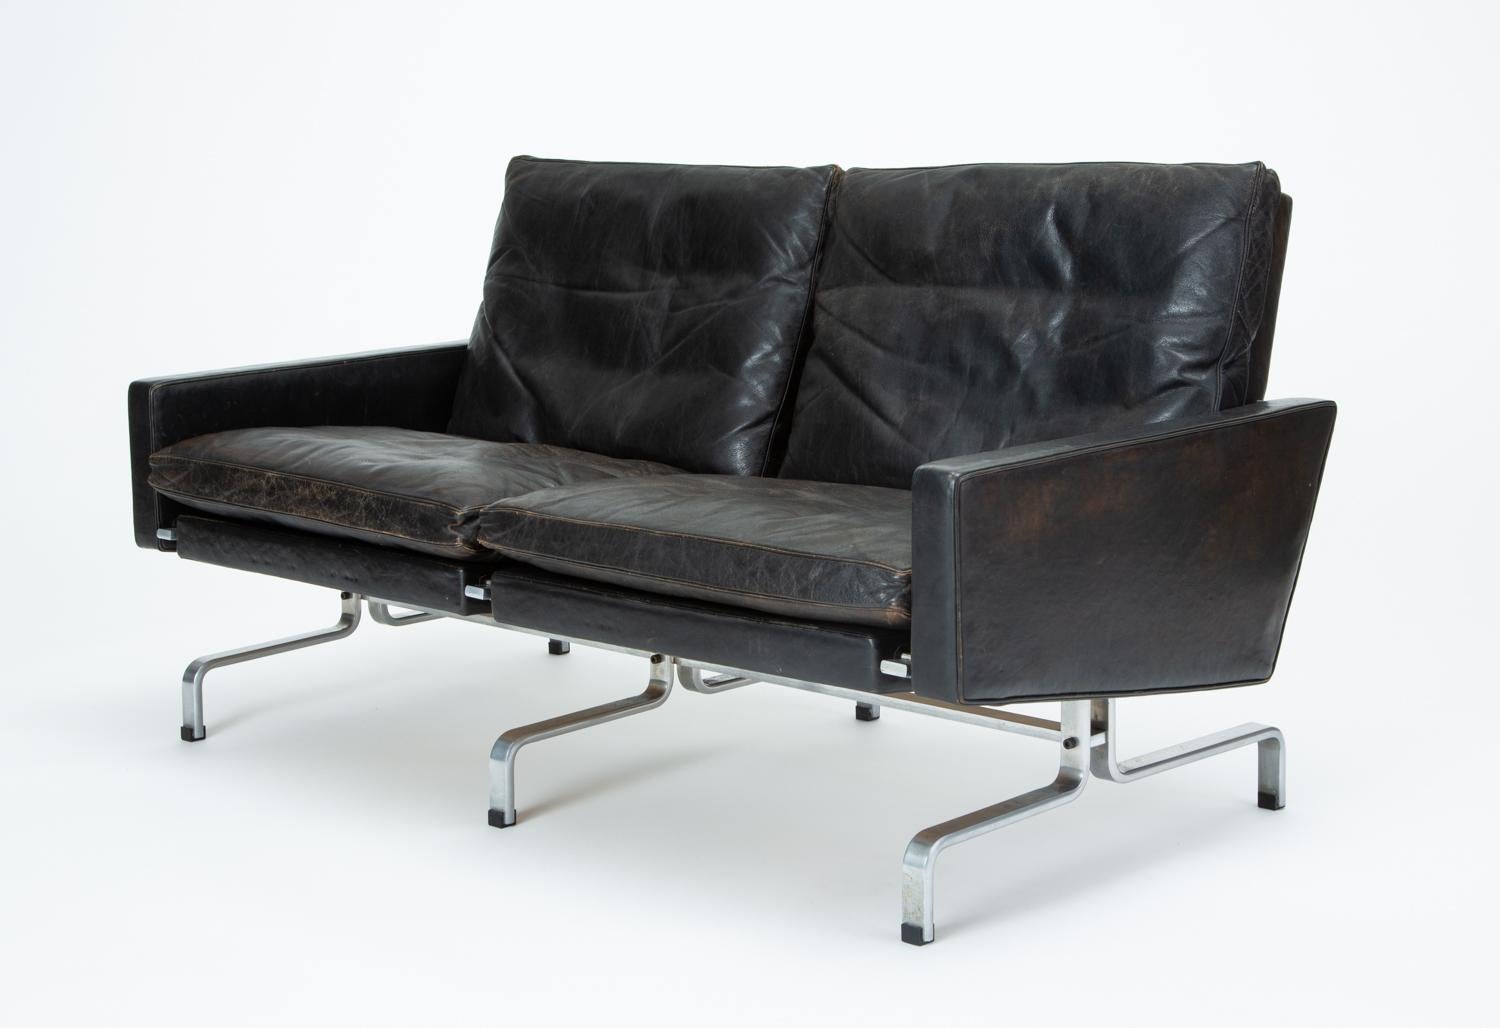 Poul Kjærholm's PK 31 seating series was envisioned as a discrete unit (the frame was designed to conform to the walls of an invisible cube) that could be multiplied to suit any use through simple repetition. This PK 31/2 love seat comprises of two